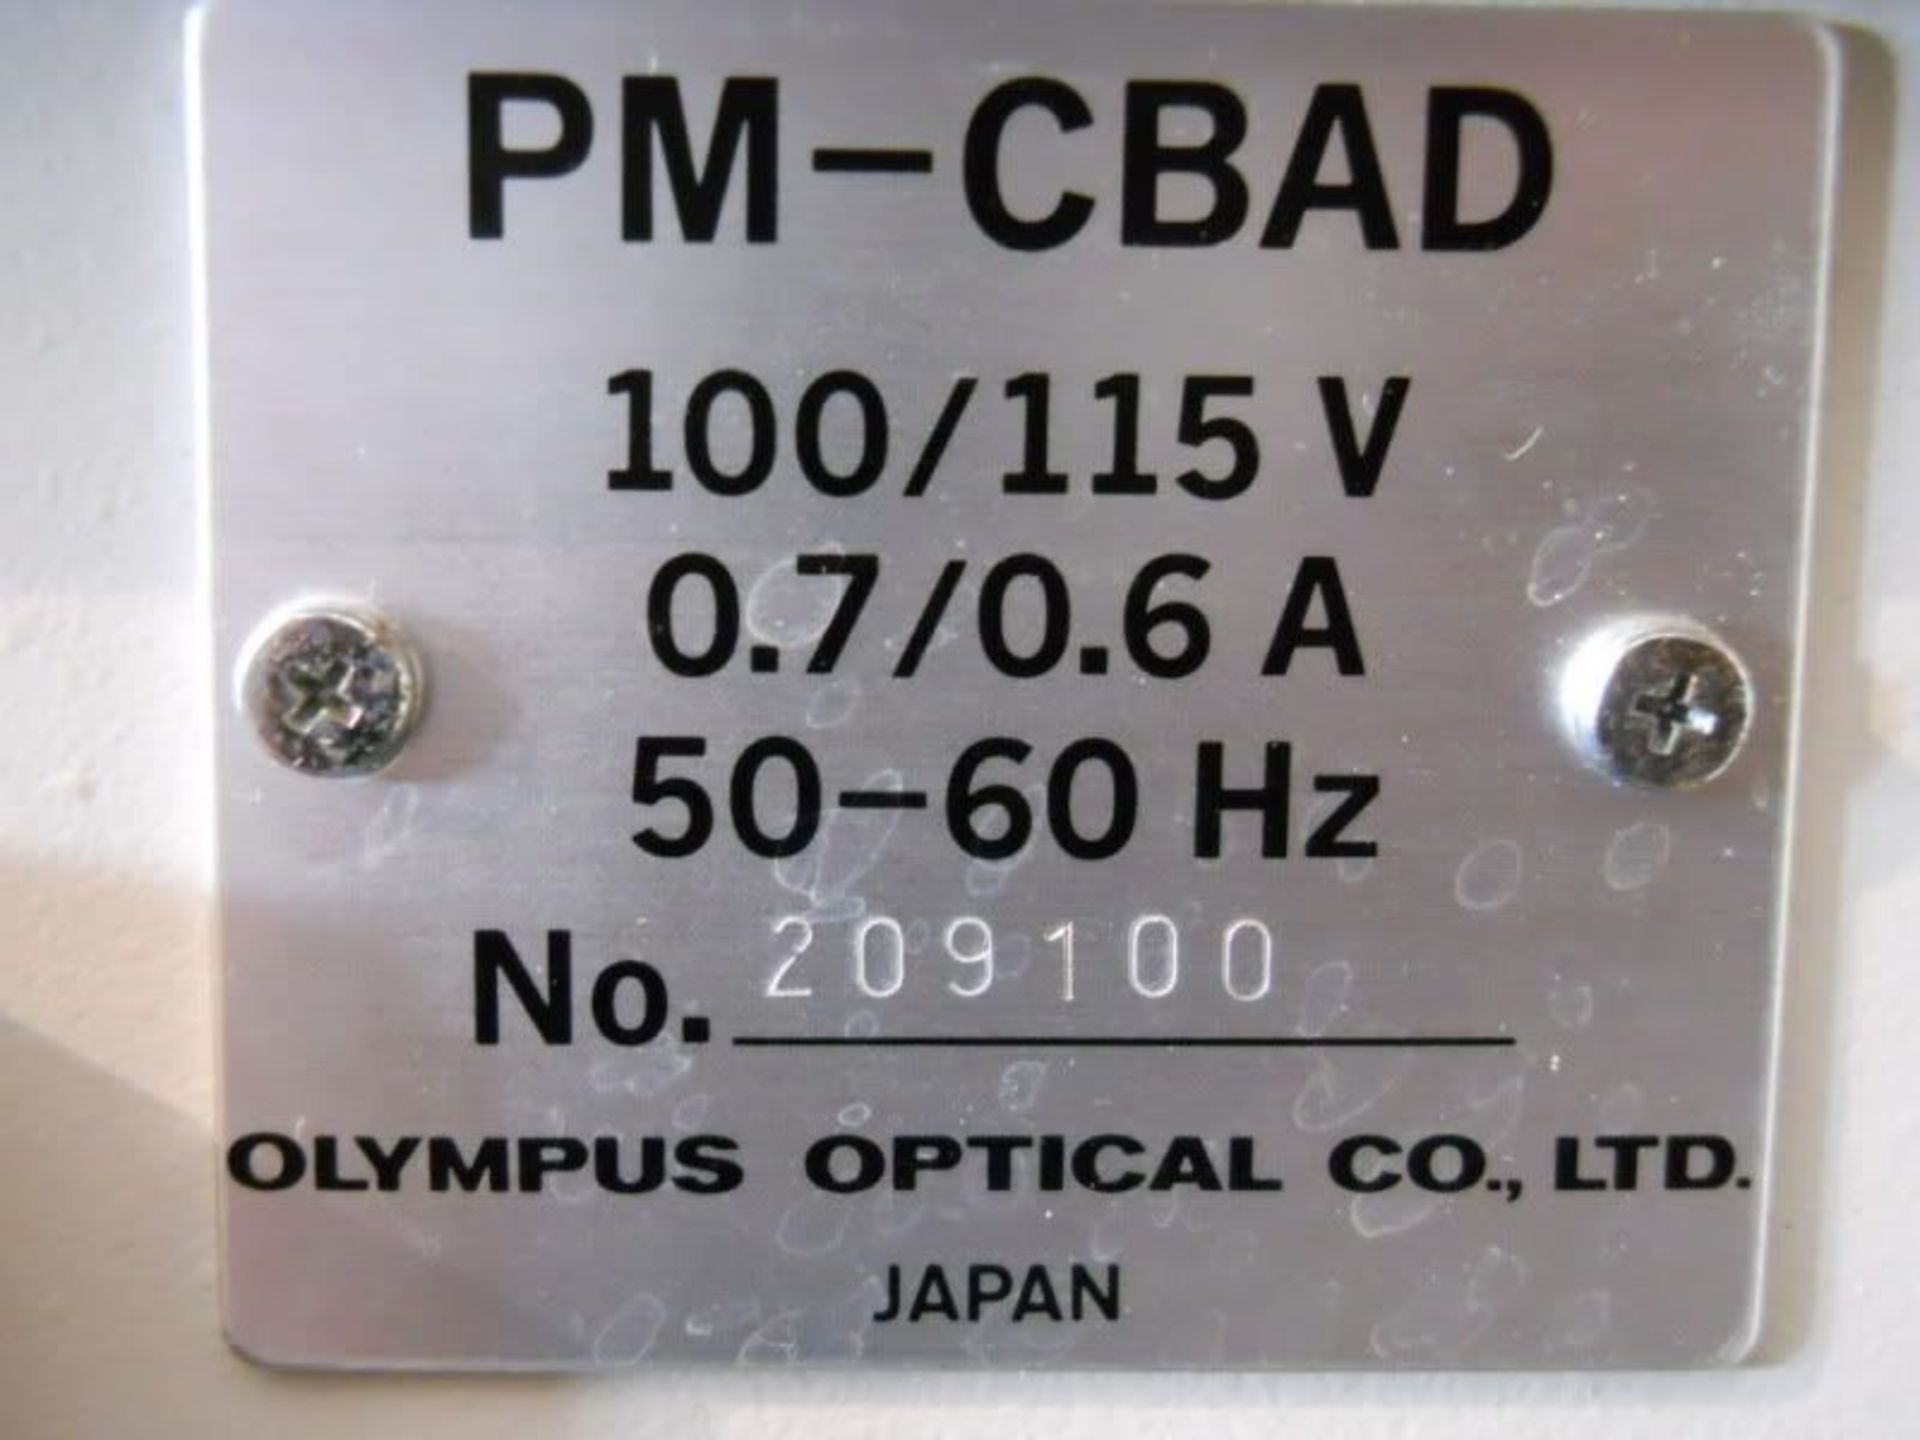 Olympus Exposure Control Unit Model PM-CBAD (PMCBAD) (For Parts), Qty 1, 321004940234 - Image 5 of 6